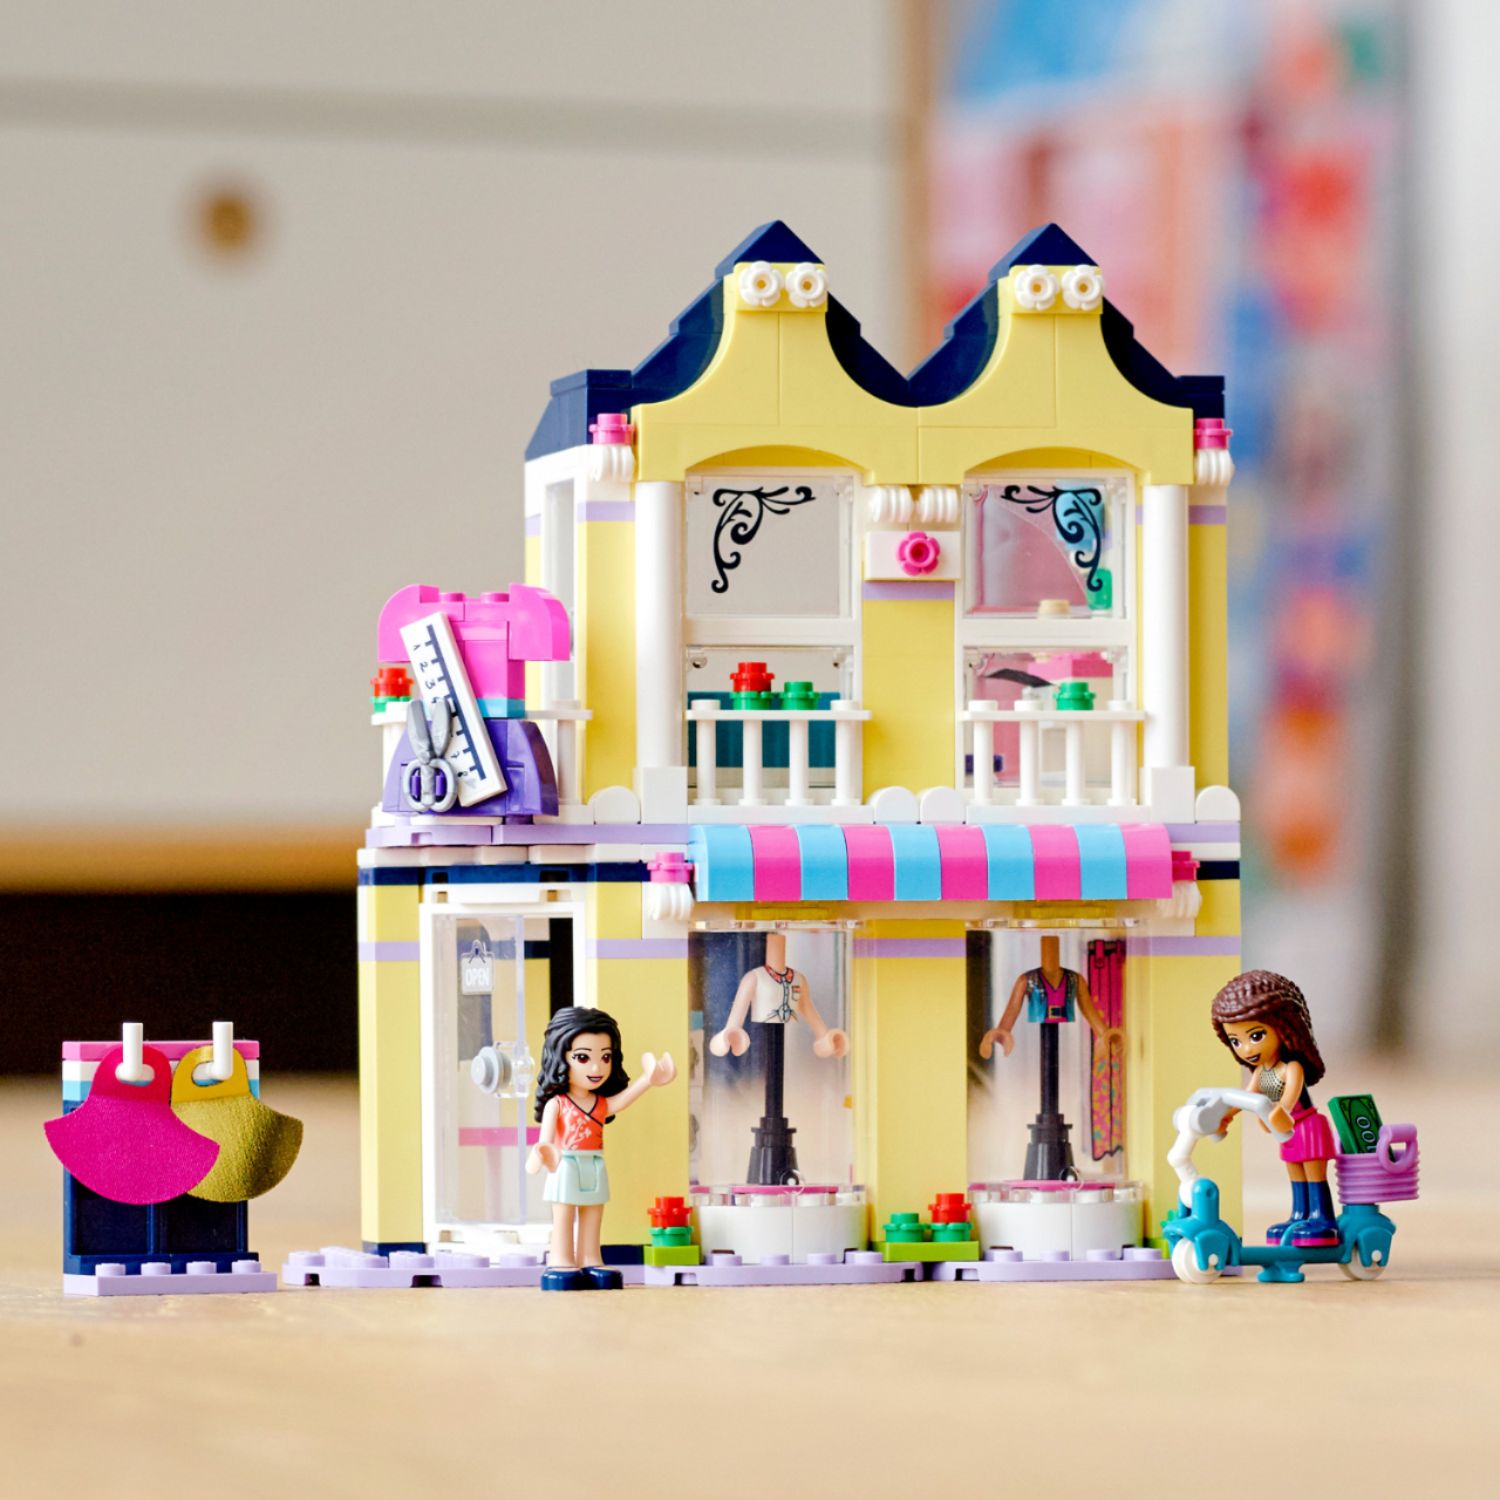 LEGO FRIENDS NEW SHOPPING MALL EMMA FIGURE BEST PRICE FREE GIFT FAST 